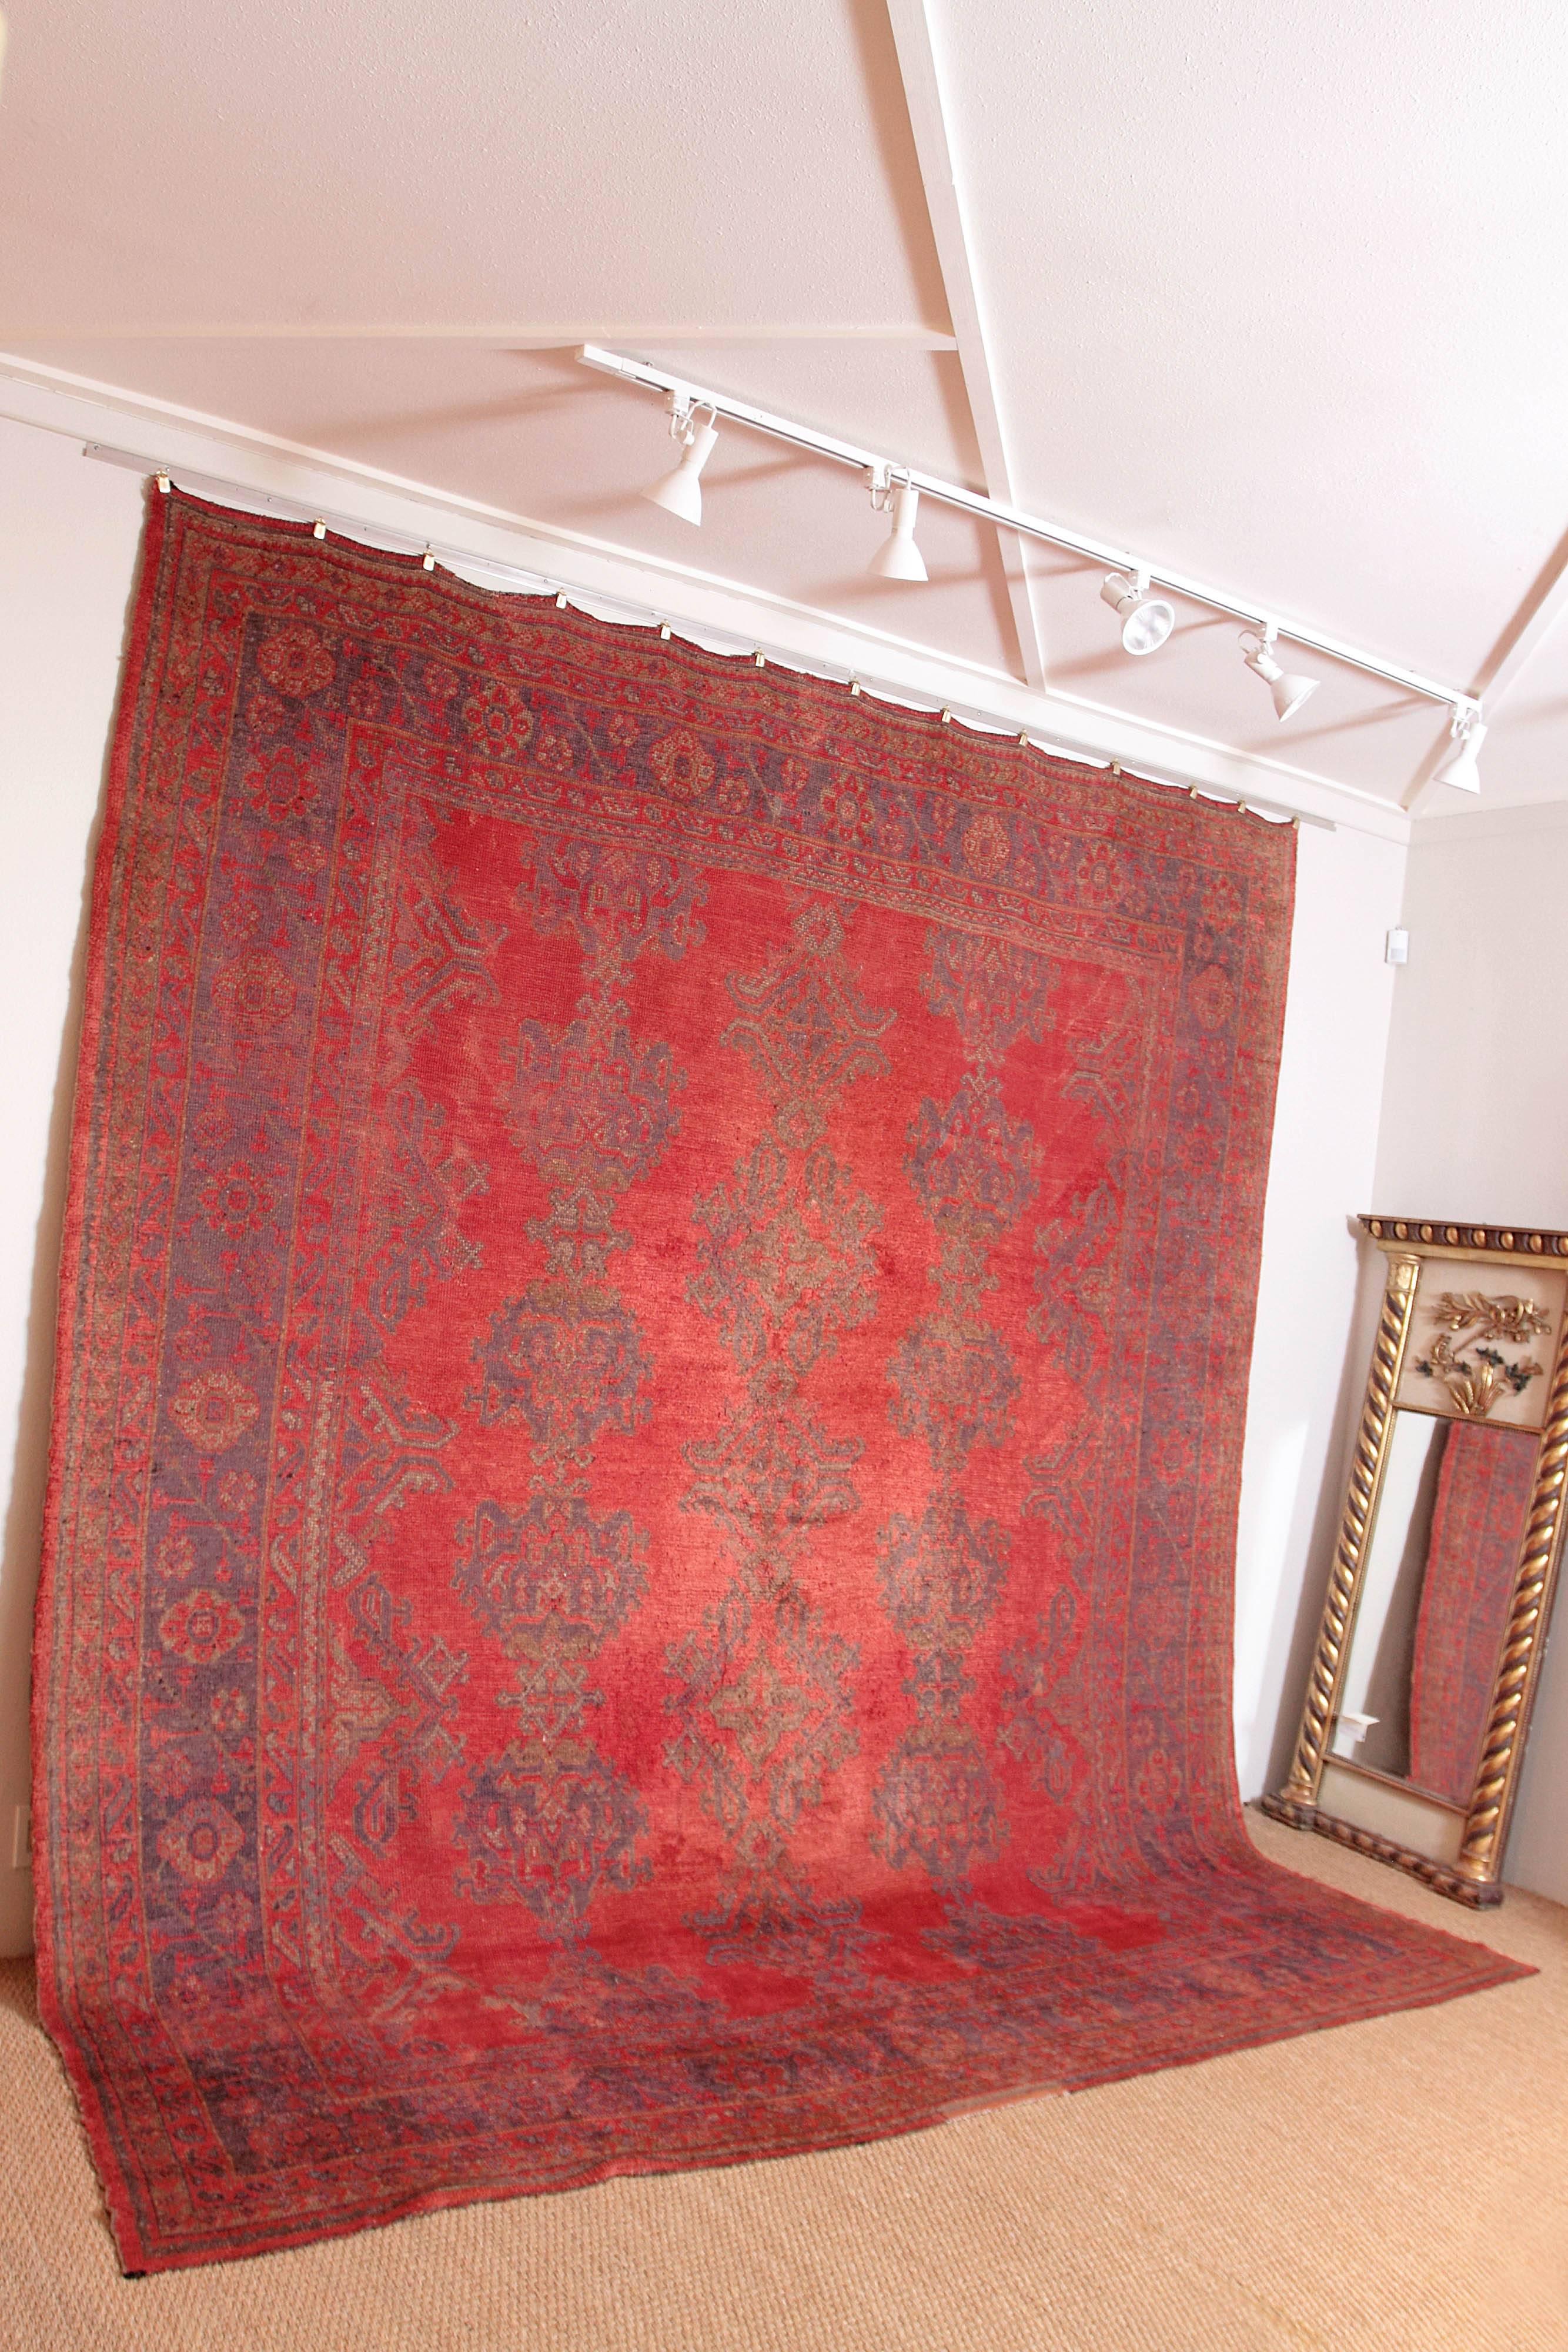 A late ottoman period Turkish Oushak rug, circa 1890 to 1910, with sylized geometric garden motifs. 
Persimmon colored field with bronze, cinnamon, and goldenrod colored yarns in the design, 
Turkey, Region of Anatolia.
Measures: 10’11” x 12’5”